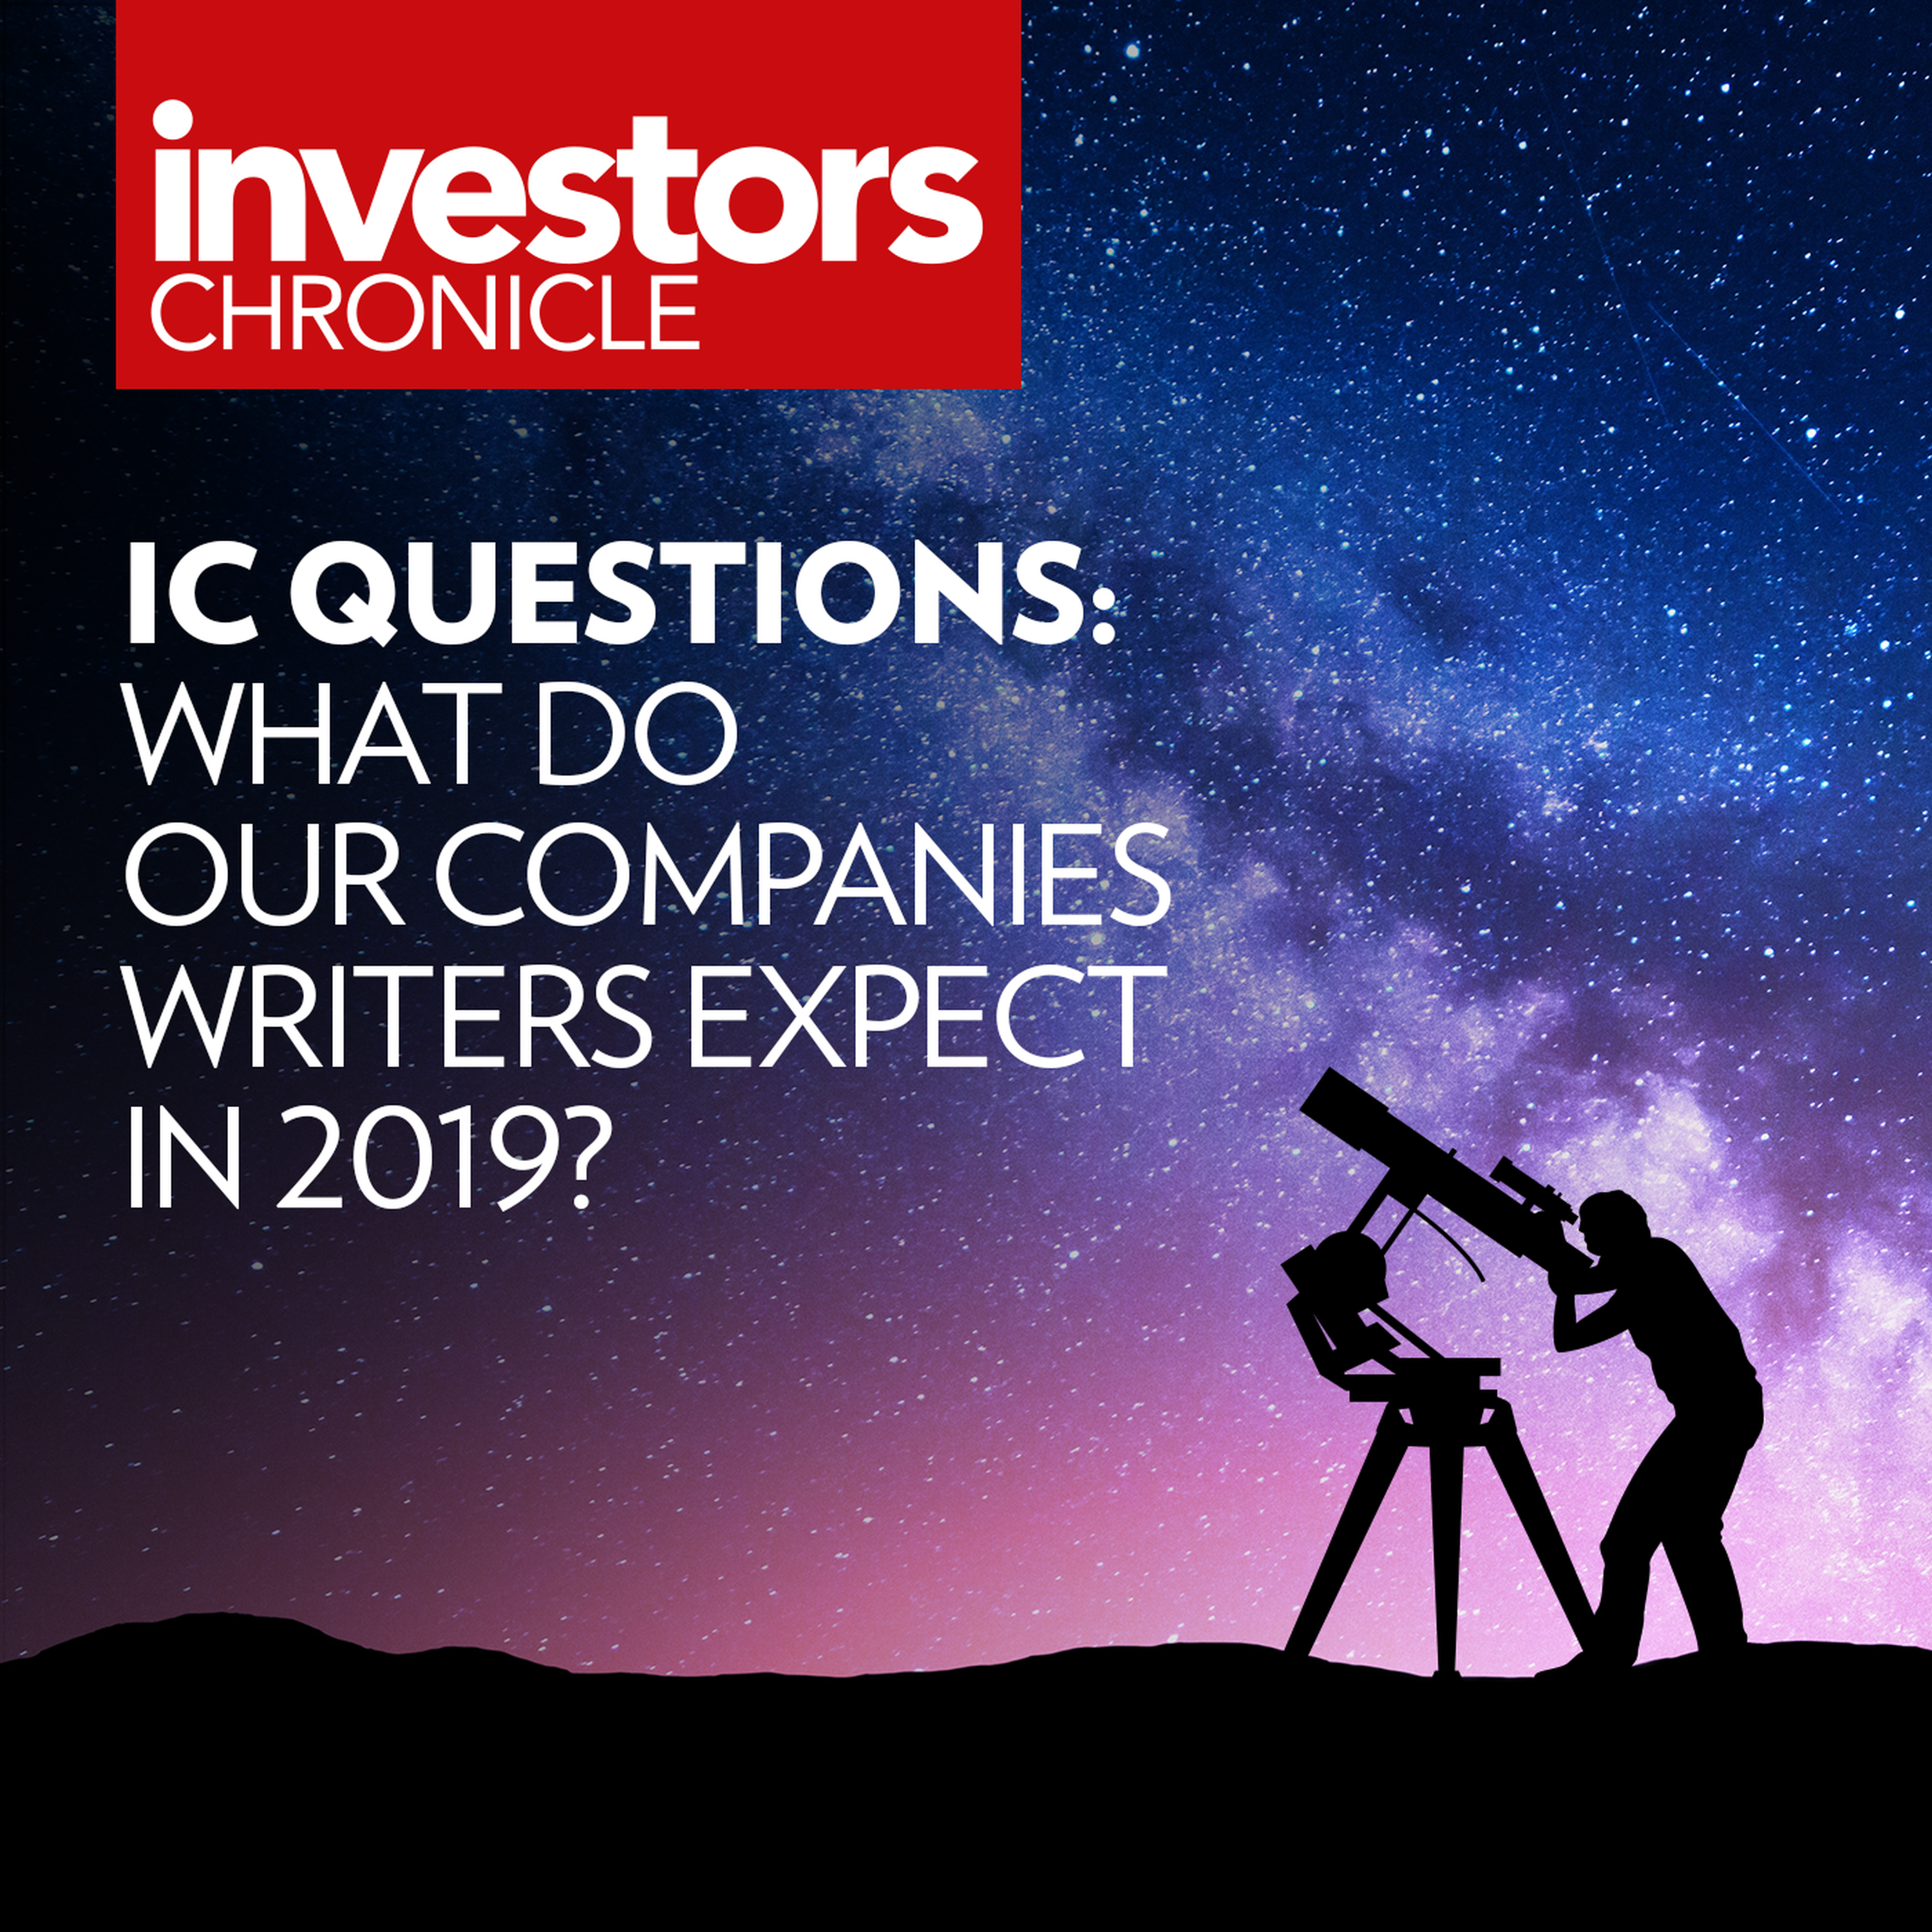 IC Questions: What do our companies writers expect in 2019?